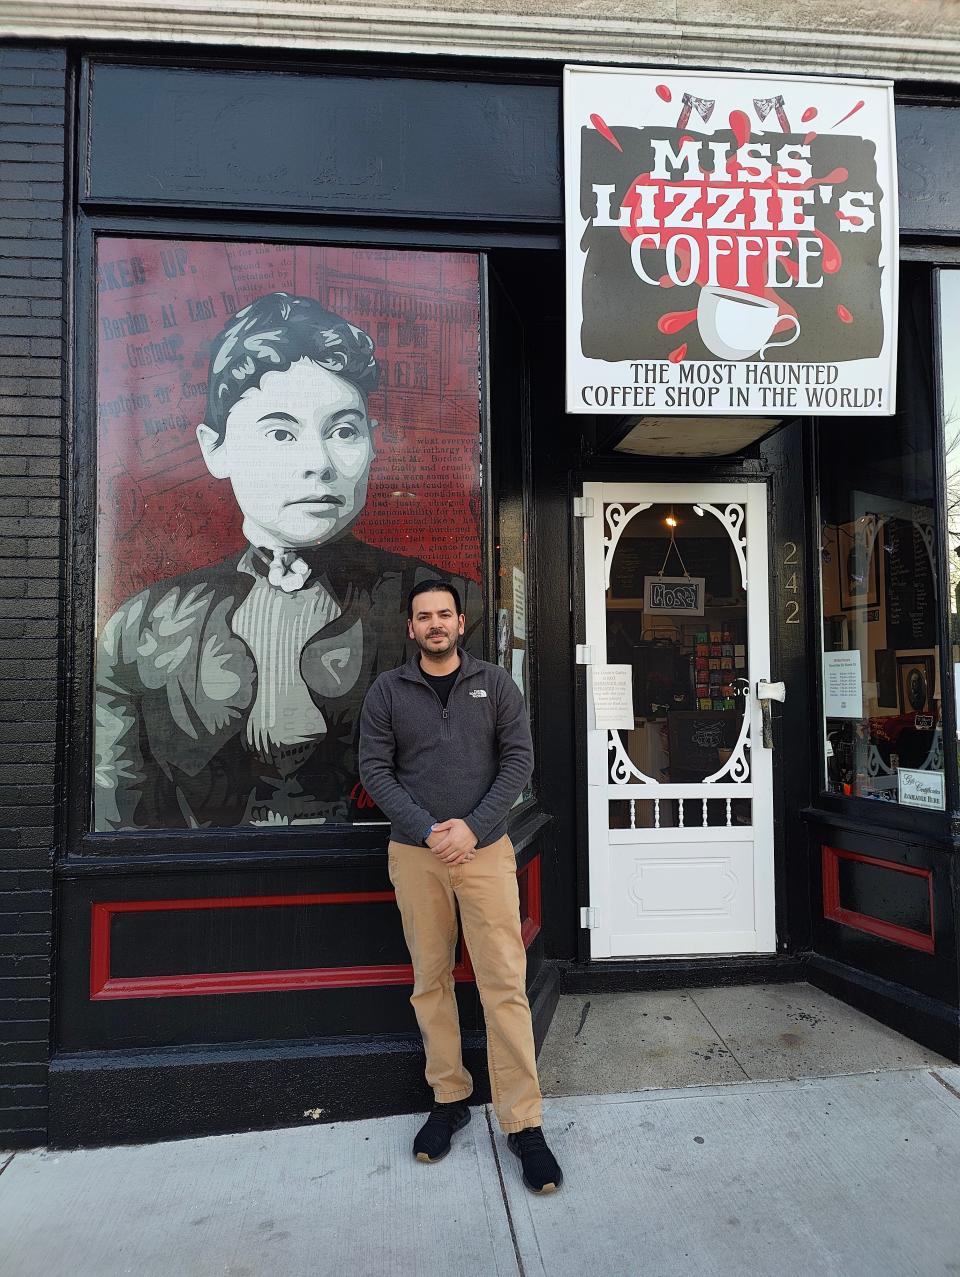 William Silvia stands in front of the window mural he designed, depicting Lizzie Borden, in the front window of Miss Lizzie's Coffee at 242 Second St. in Fall River.